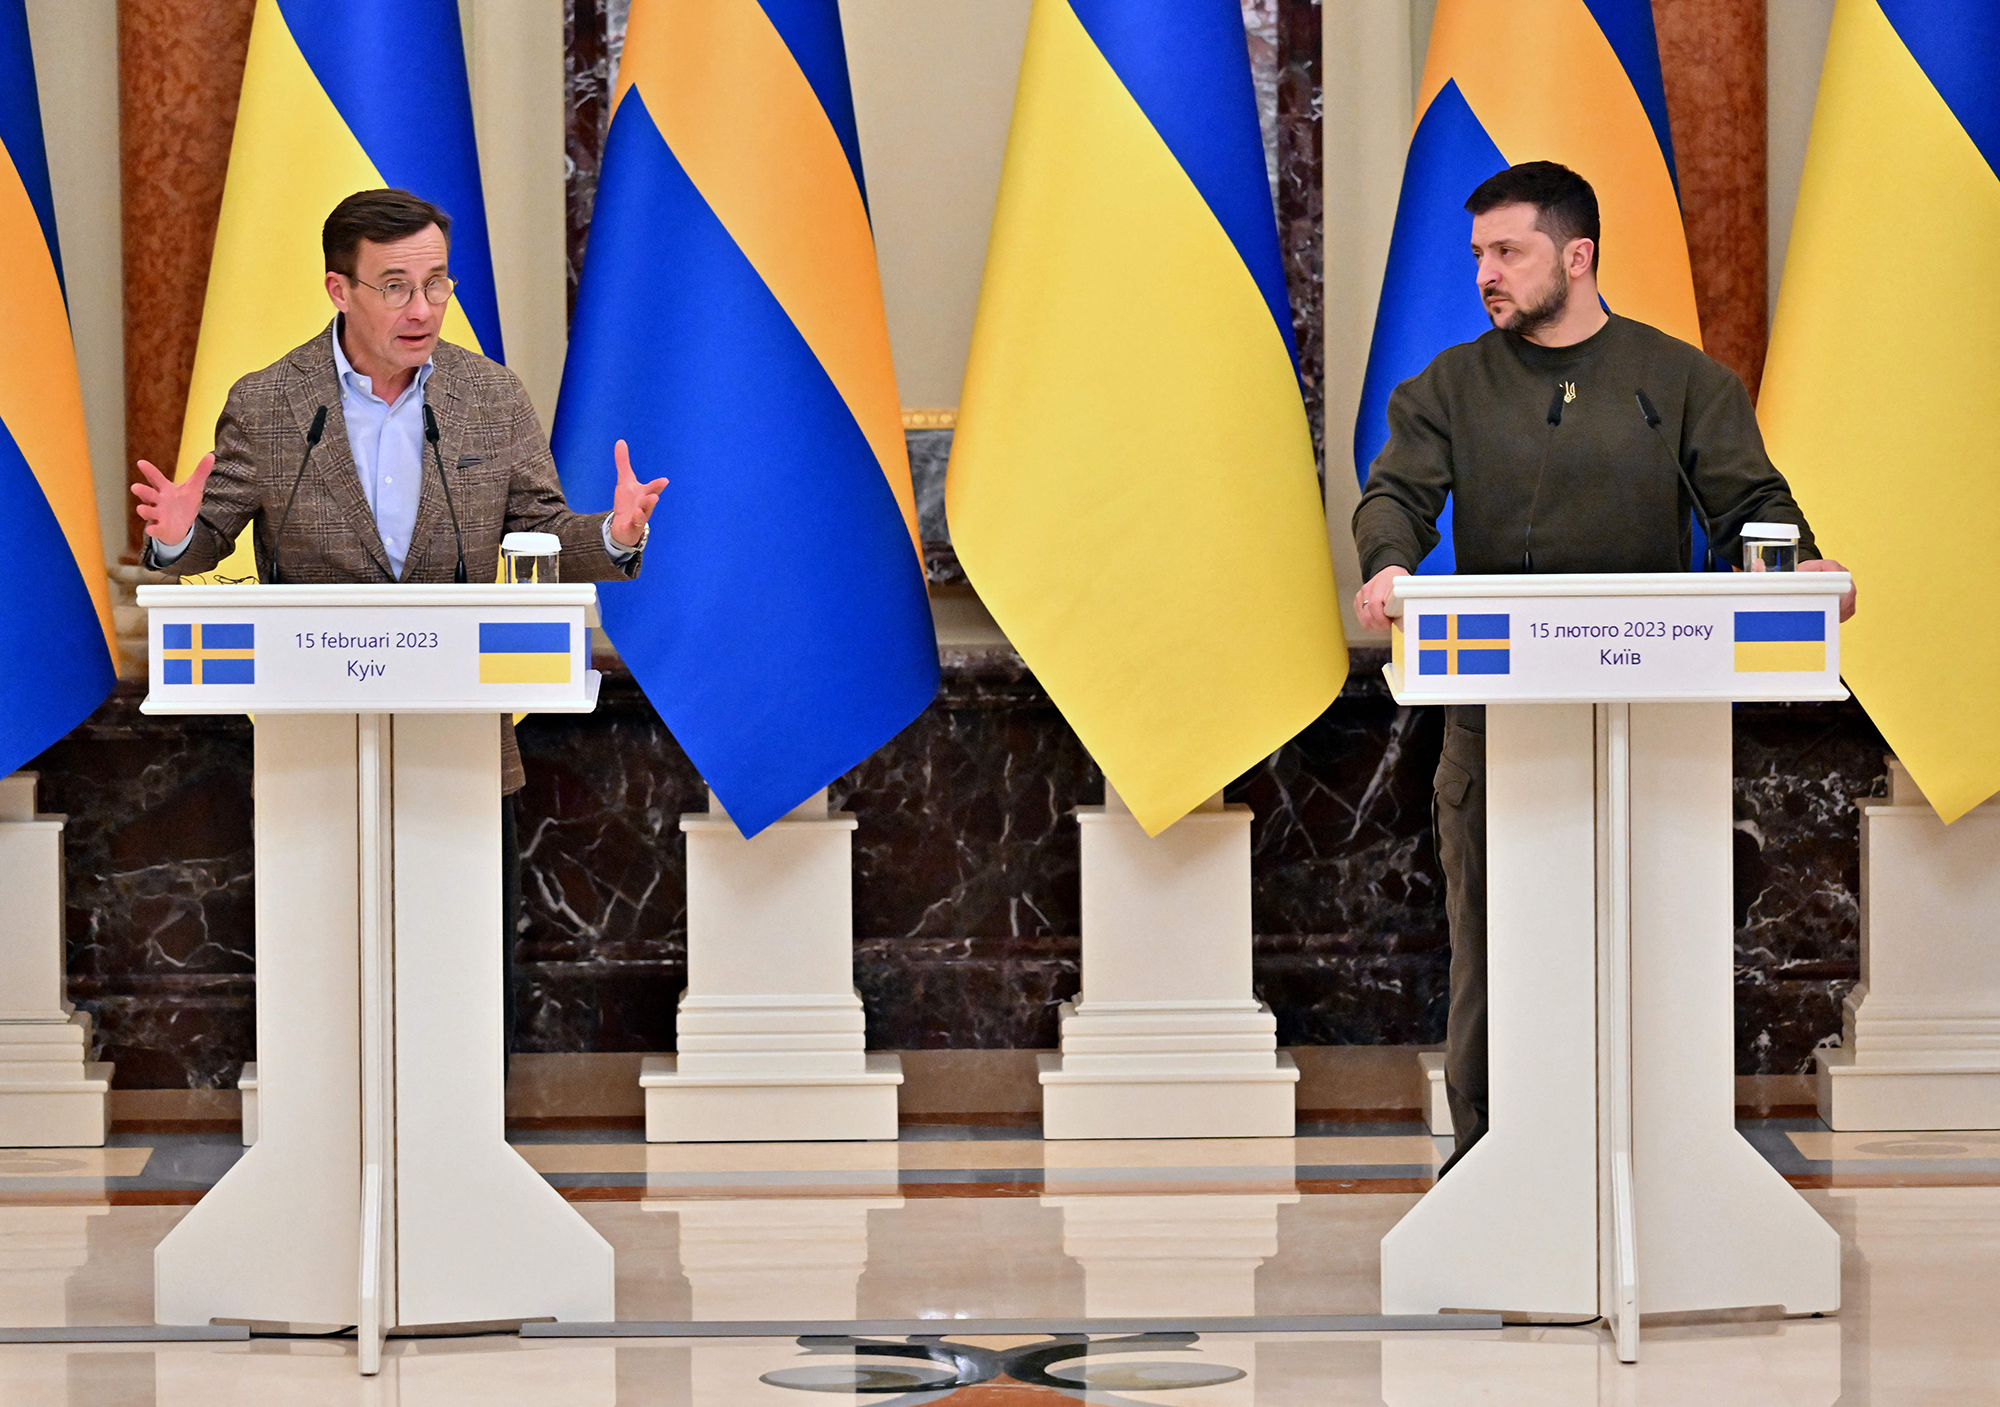 Ukrainian President Volodymyr Zelensky and Prime Minister of Sweden Ulf Kristersson give their joint press conference following the talks in Kyiv on February 15.